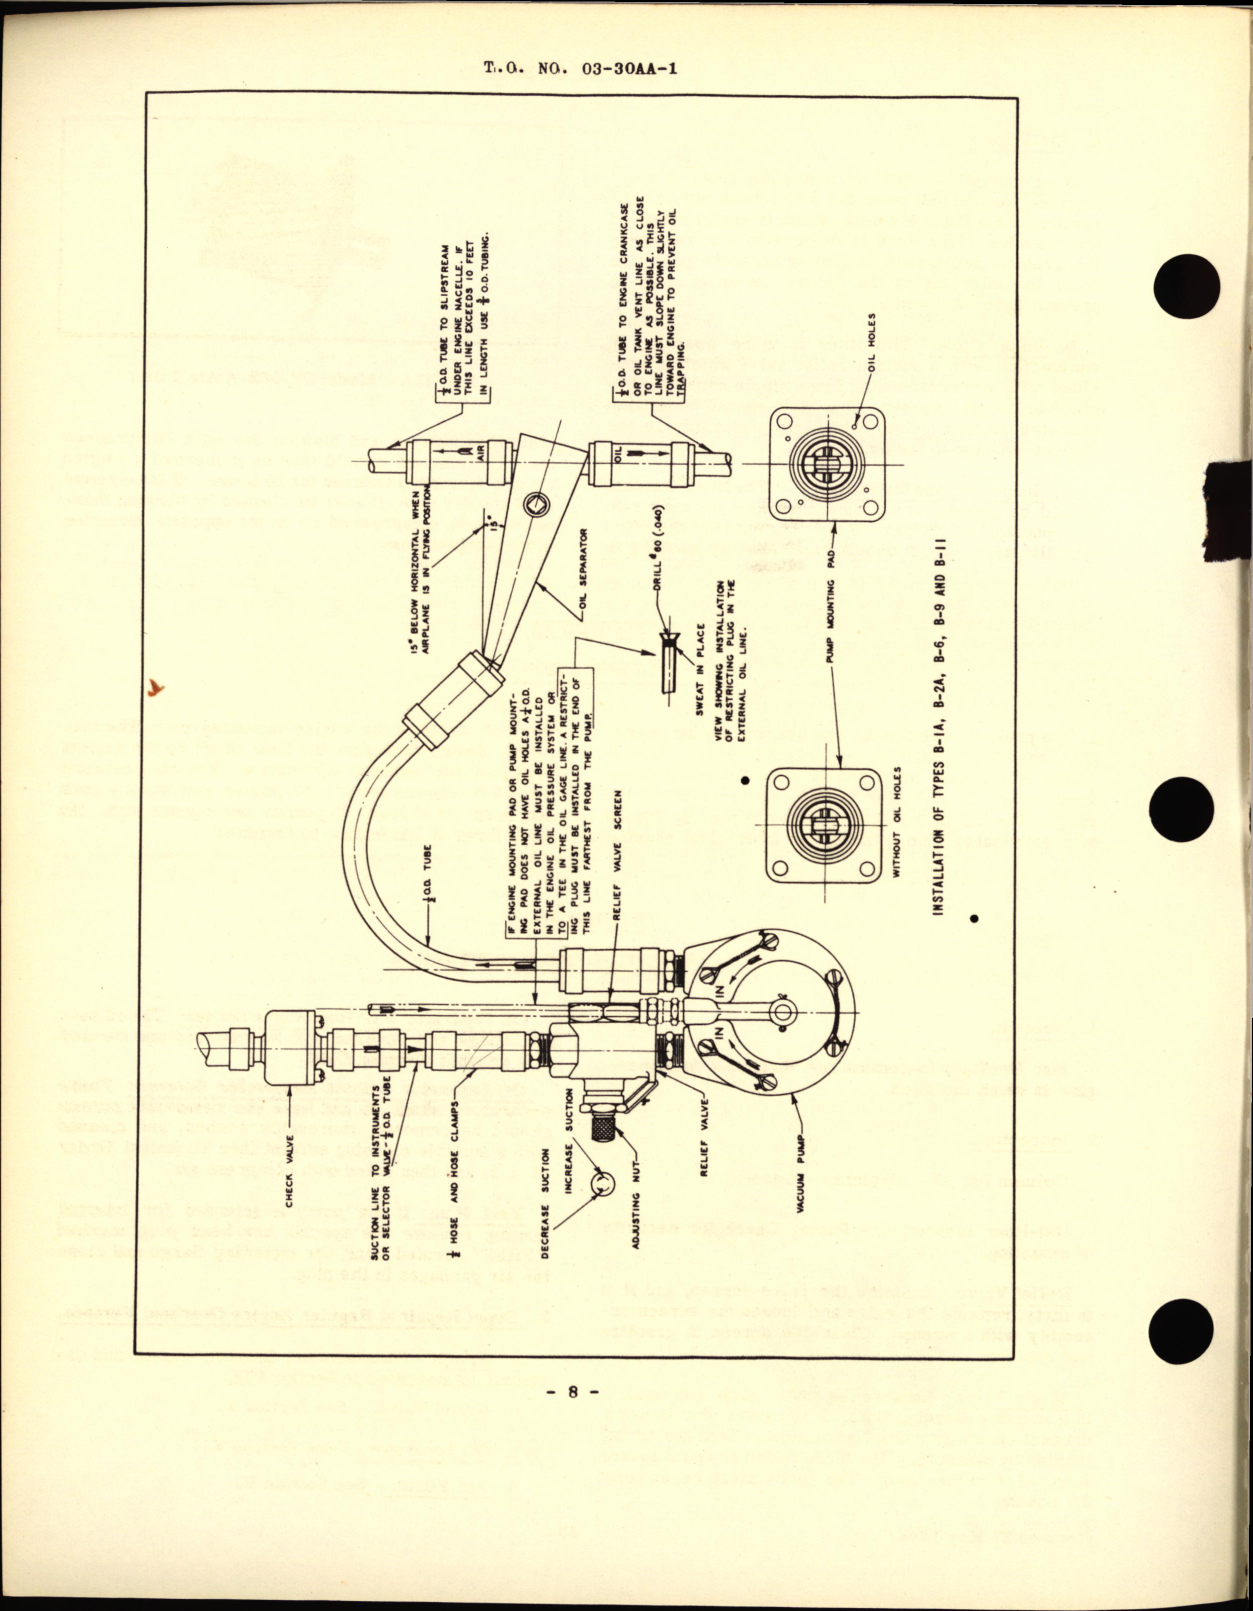 Sample page 7 from AirCorps Library document: Operation, Service and Overhaul Instructions with Parts Catalog for Engine-Driven Vacuum Pumps